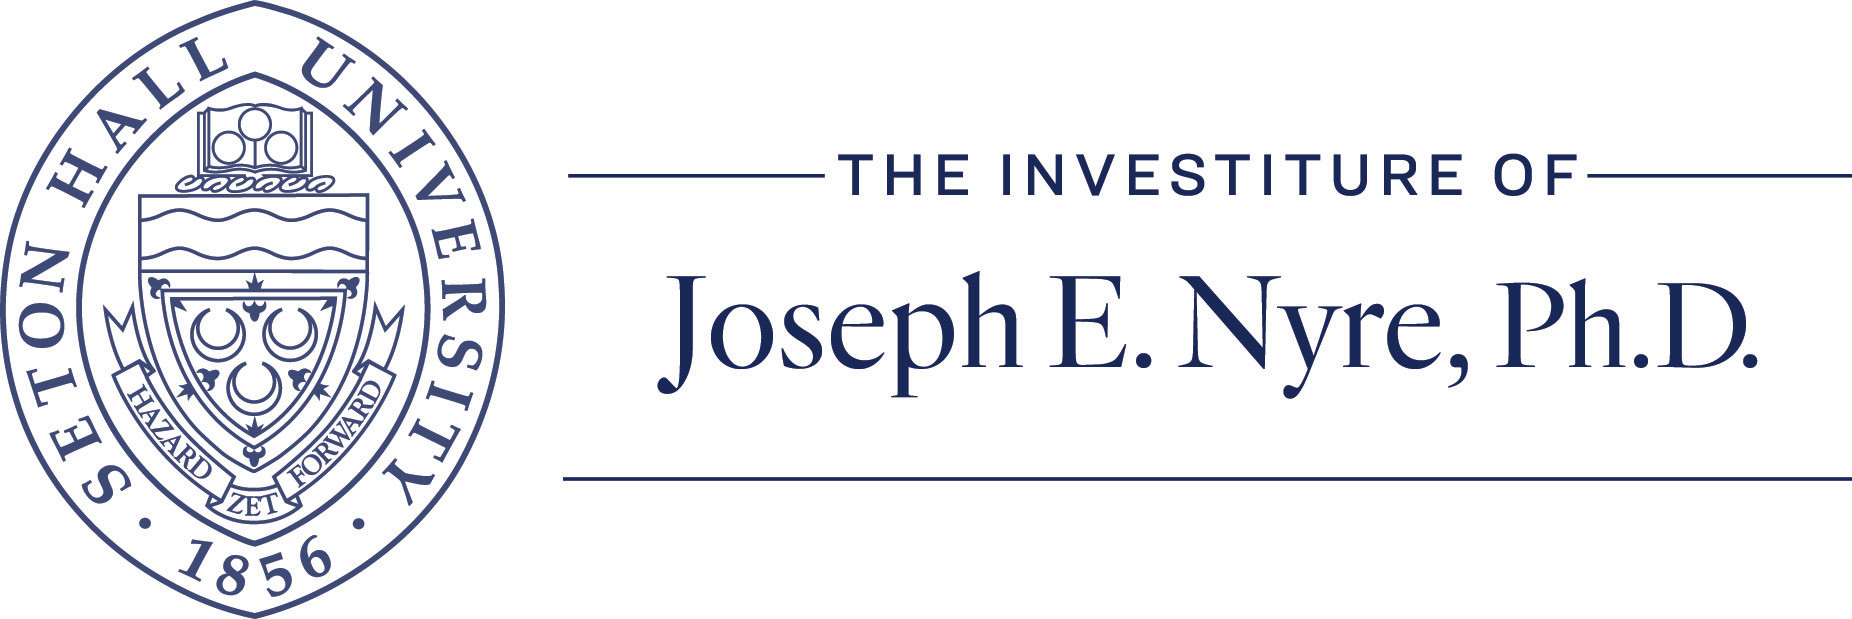 Presidential Seal and text "The Investiture of Joseph E. Nyre, Ph.D.